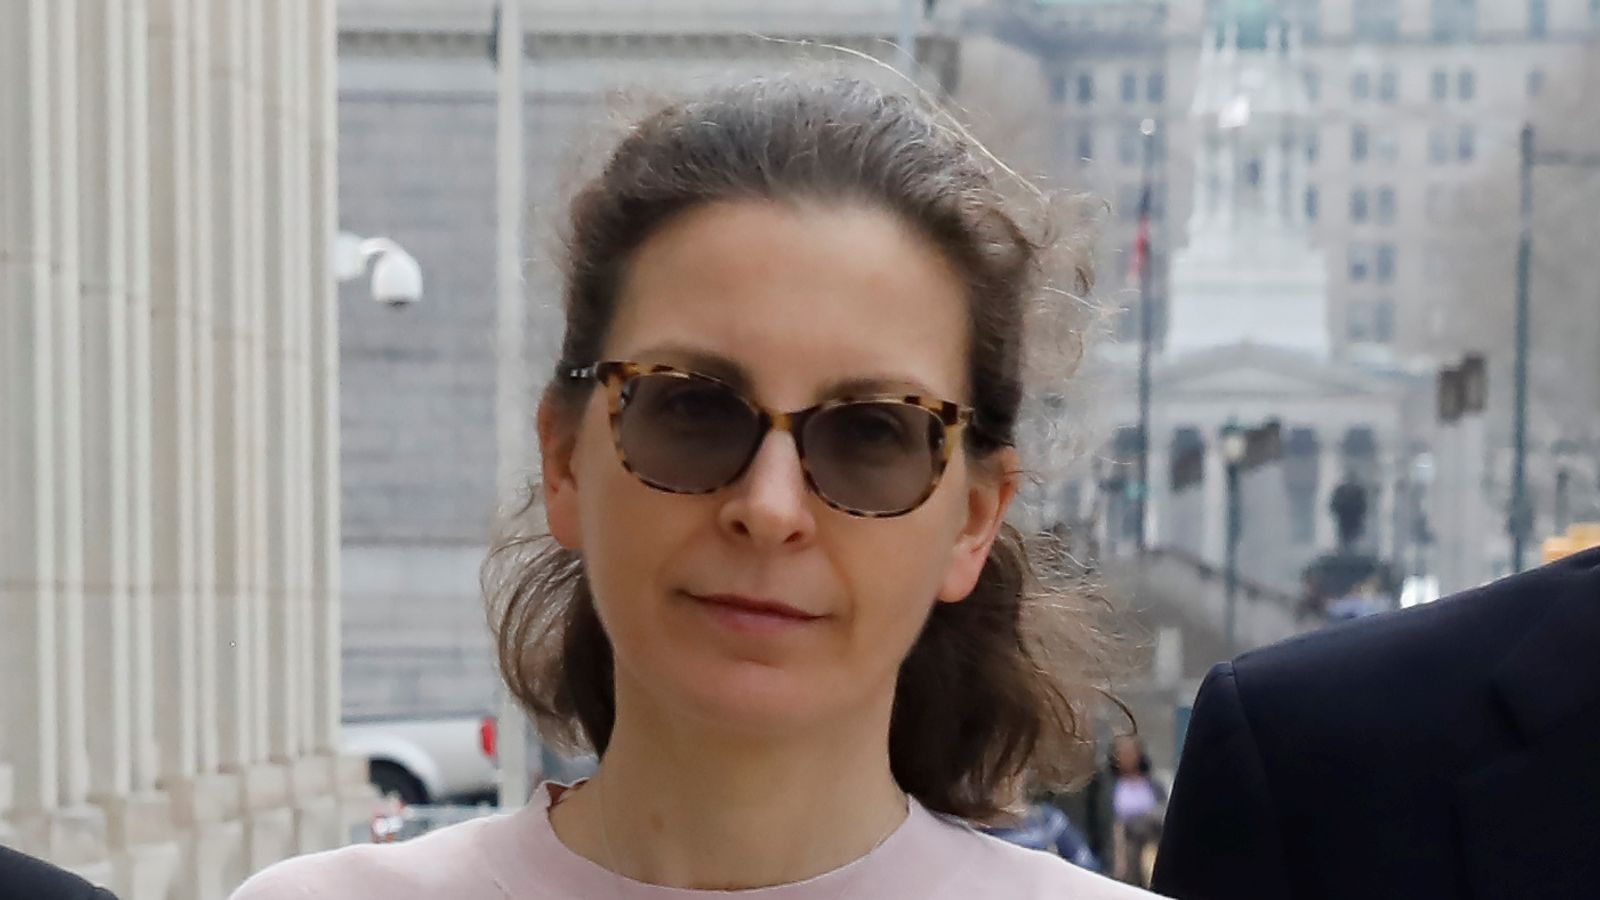 Seagram Heiress Clare Bronfman Jailed For Six Years Over Role In Nxivm Sex Slaves Cult Us News 3142